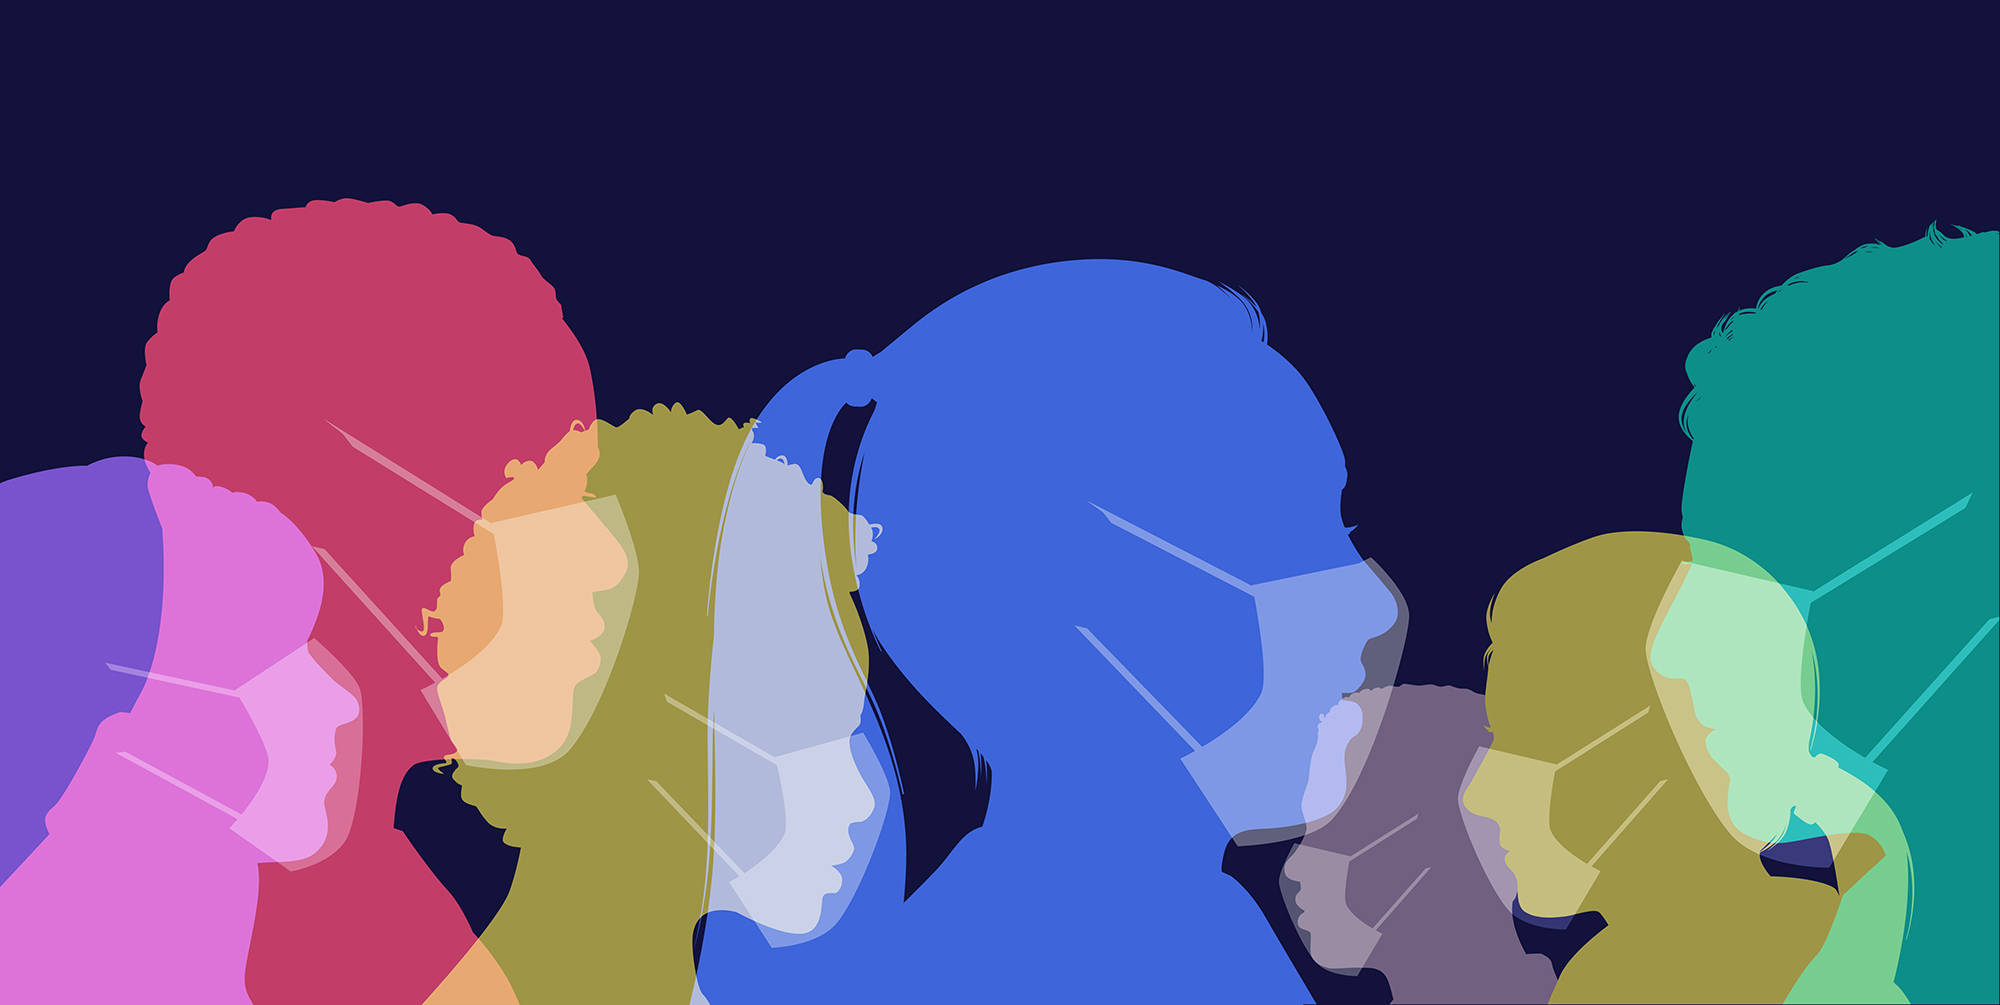 Illustration of a group of people facing different directions wearing masks. Each head and mask is translucent and of different colors on a dark blue background.